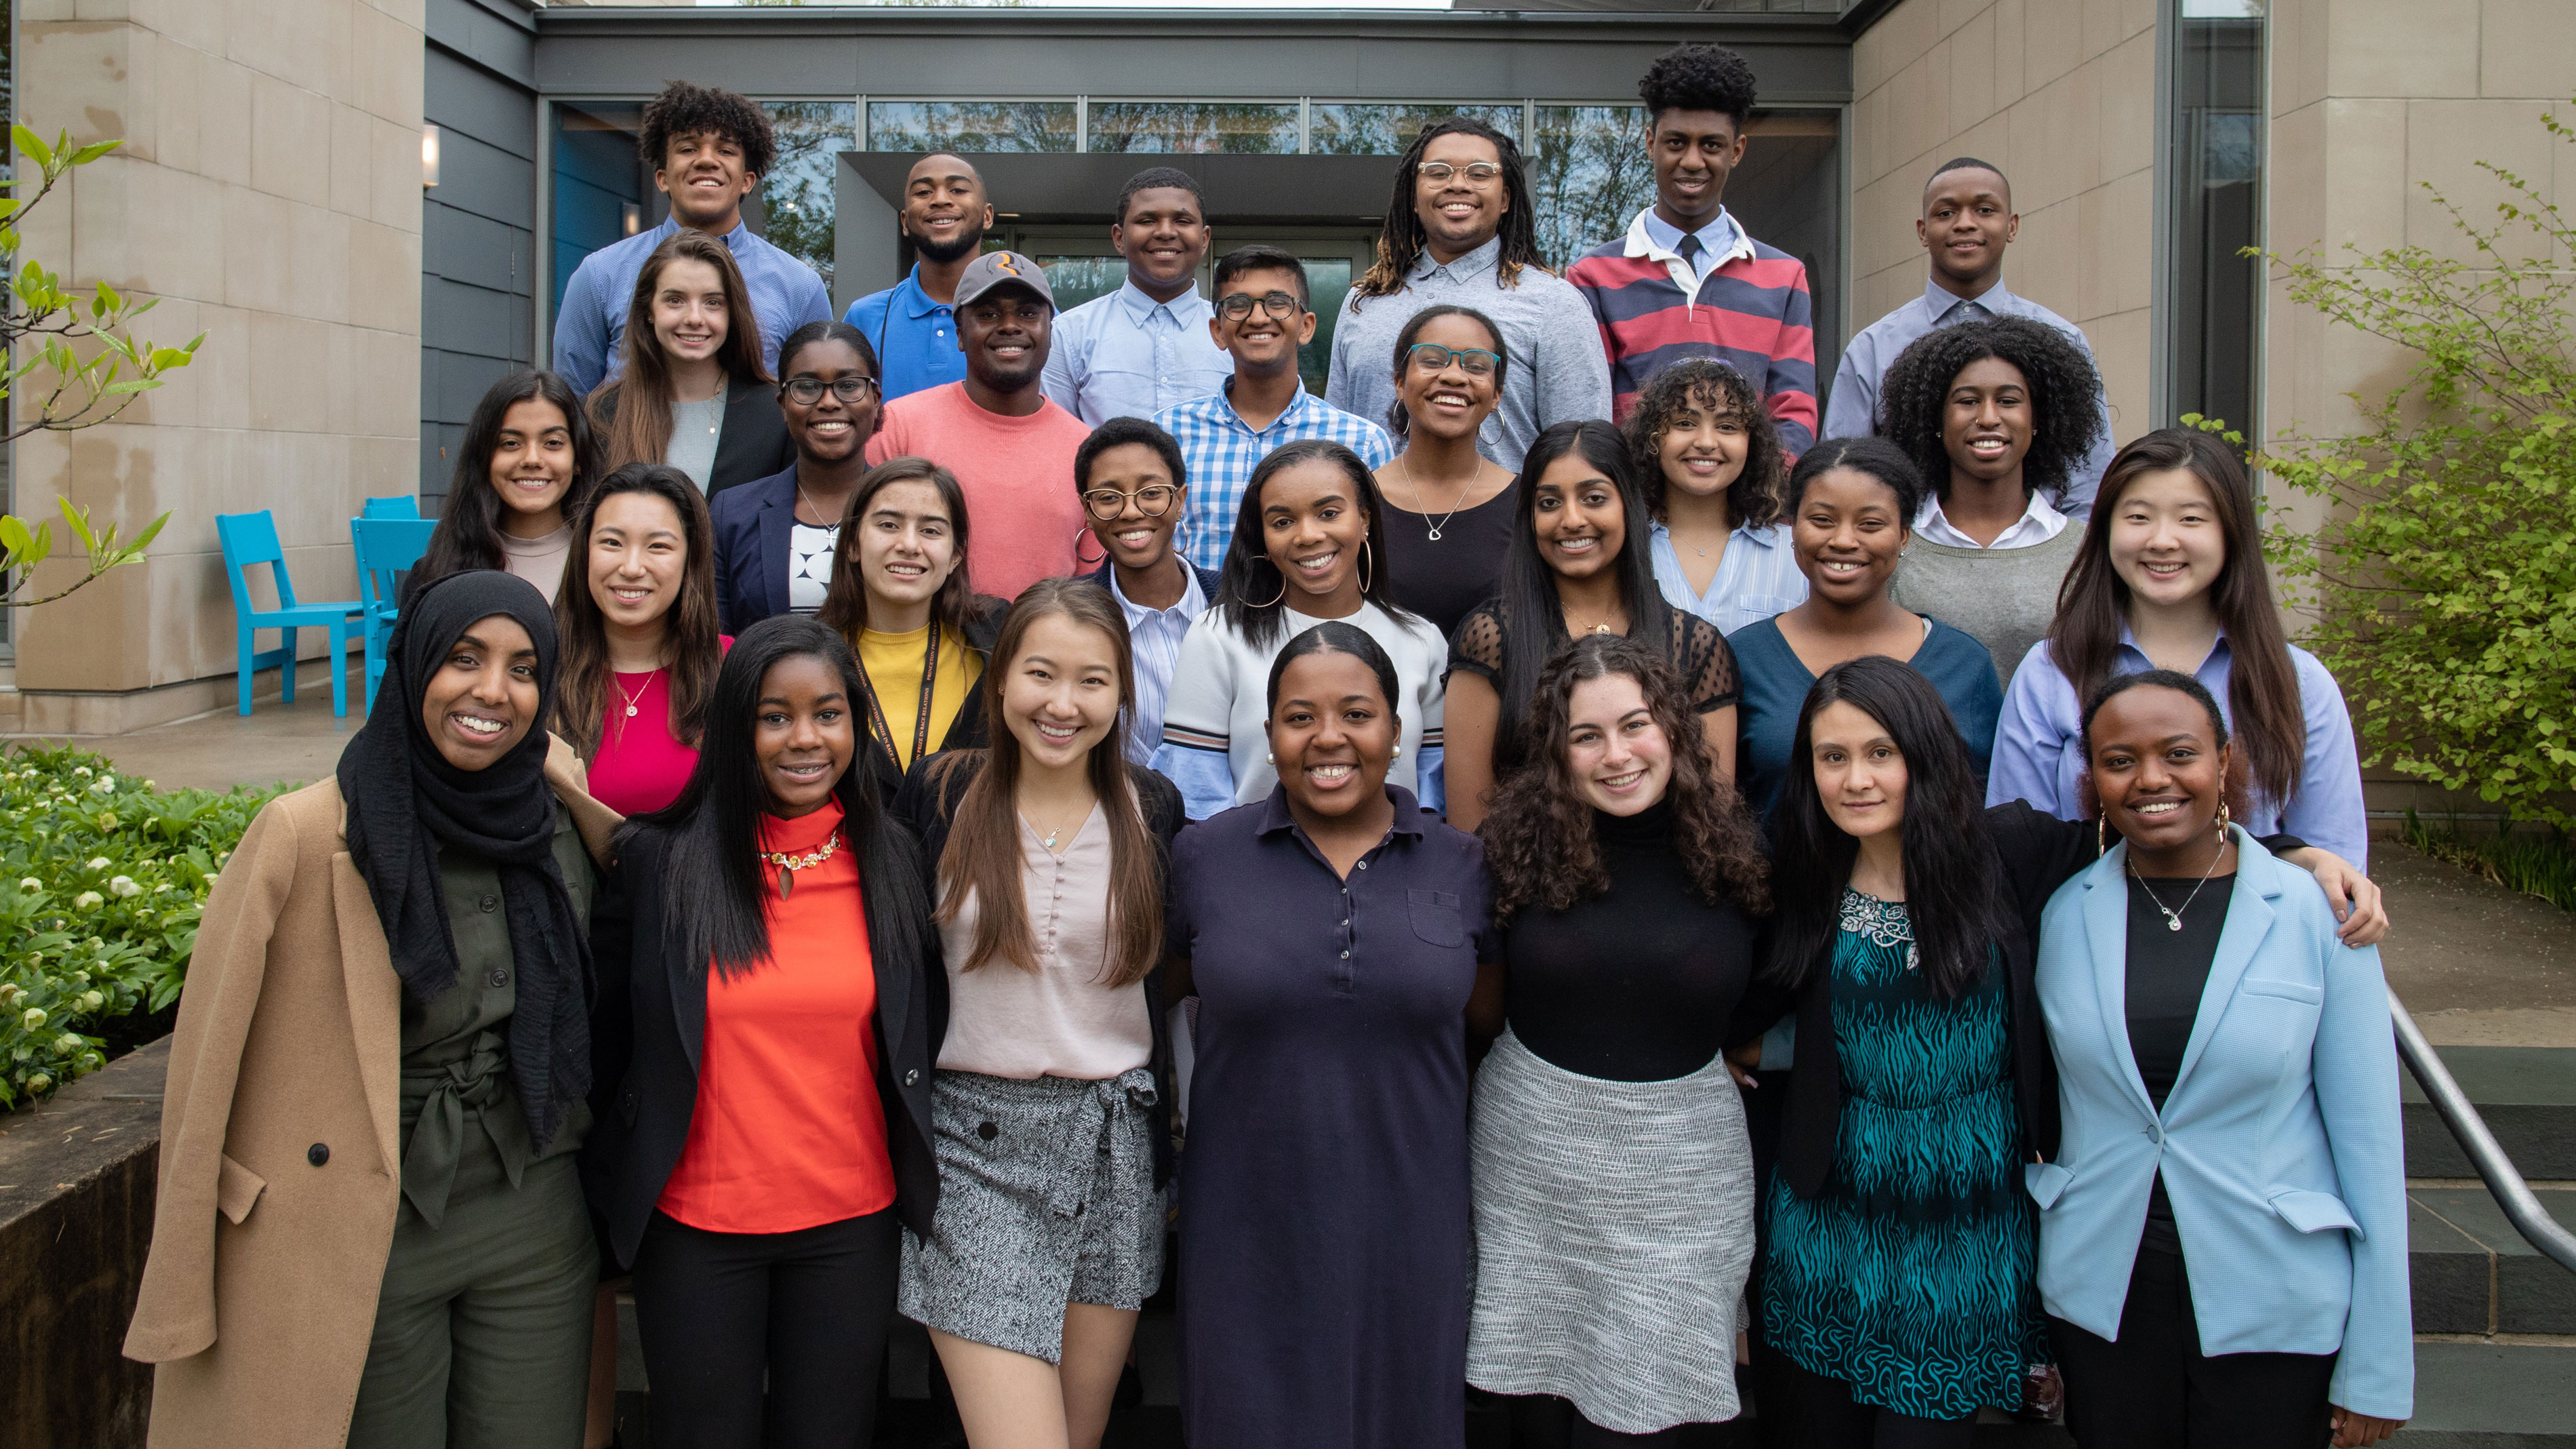 Princeton Prize in Race Relations honors high school students for promoting understanding, respect